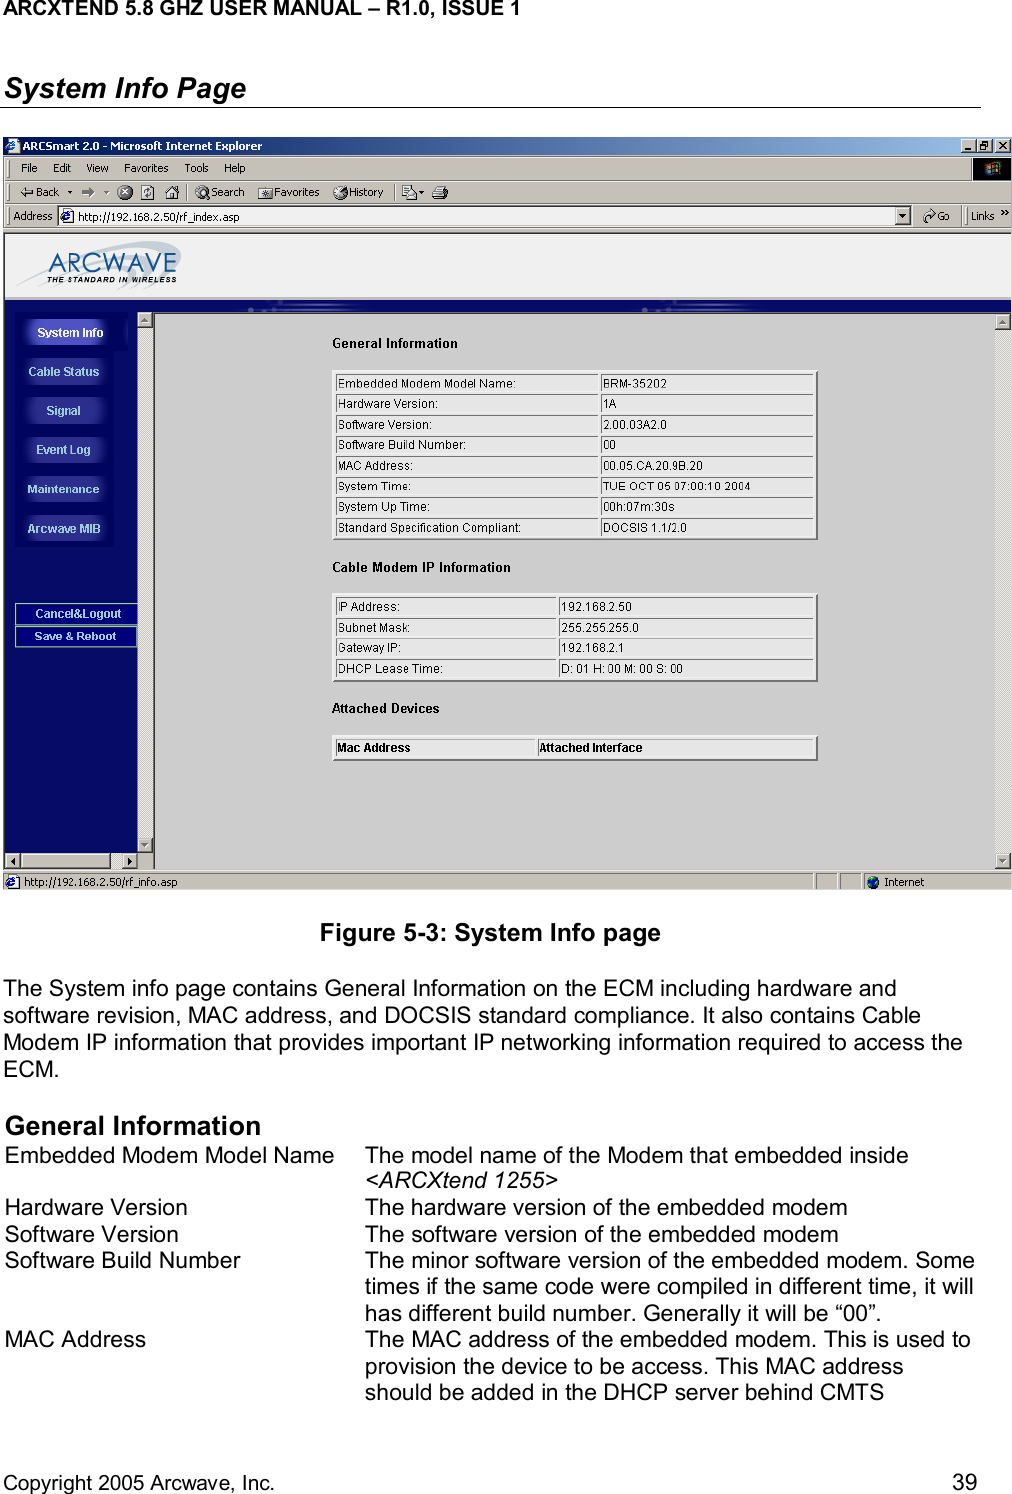 ARCXTEND 5.8 GHZ USER MANUAL – R1.0, ISSUE 1  Copyright 2005 Arcwave, Inc.    39 System Info Page  Figure 5-3: System Info page The System info page contains General Information on the ECM including hardware and software revision, MAC address, and DOCSIS standard compliance. It also contains Cable Modem IP information that provides important IP networking information required to access the ECM.  General Information  Embedded Modem Model Name  The model name of the Modem that embedded inside &lt;ARCXtend 1255&gt; Hardware Version  The hardware version of the embedded modem Software Version  The software version of the embedded modem Software Build Number  The minor software version of the embedded modem. Some times if the same code were compiled in different time, it will has different build number. Generally it will be “00”. MAC Address  The MAC address of the embedded modem. This is used to provision the device to be access. This MAC address should be added in the DHCP server behind CMTS 